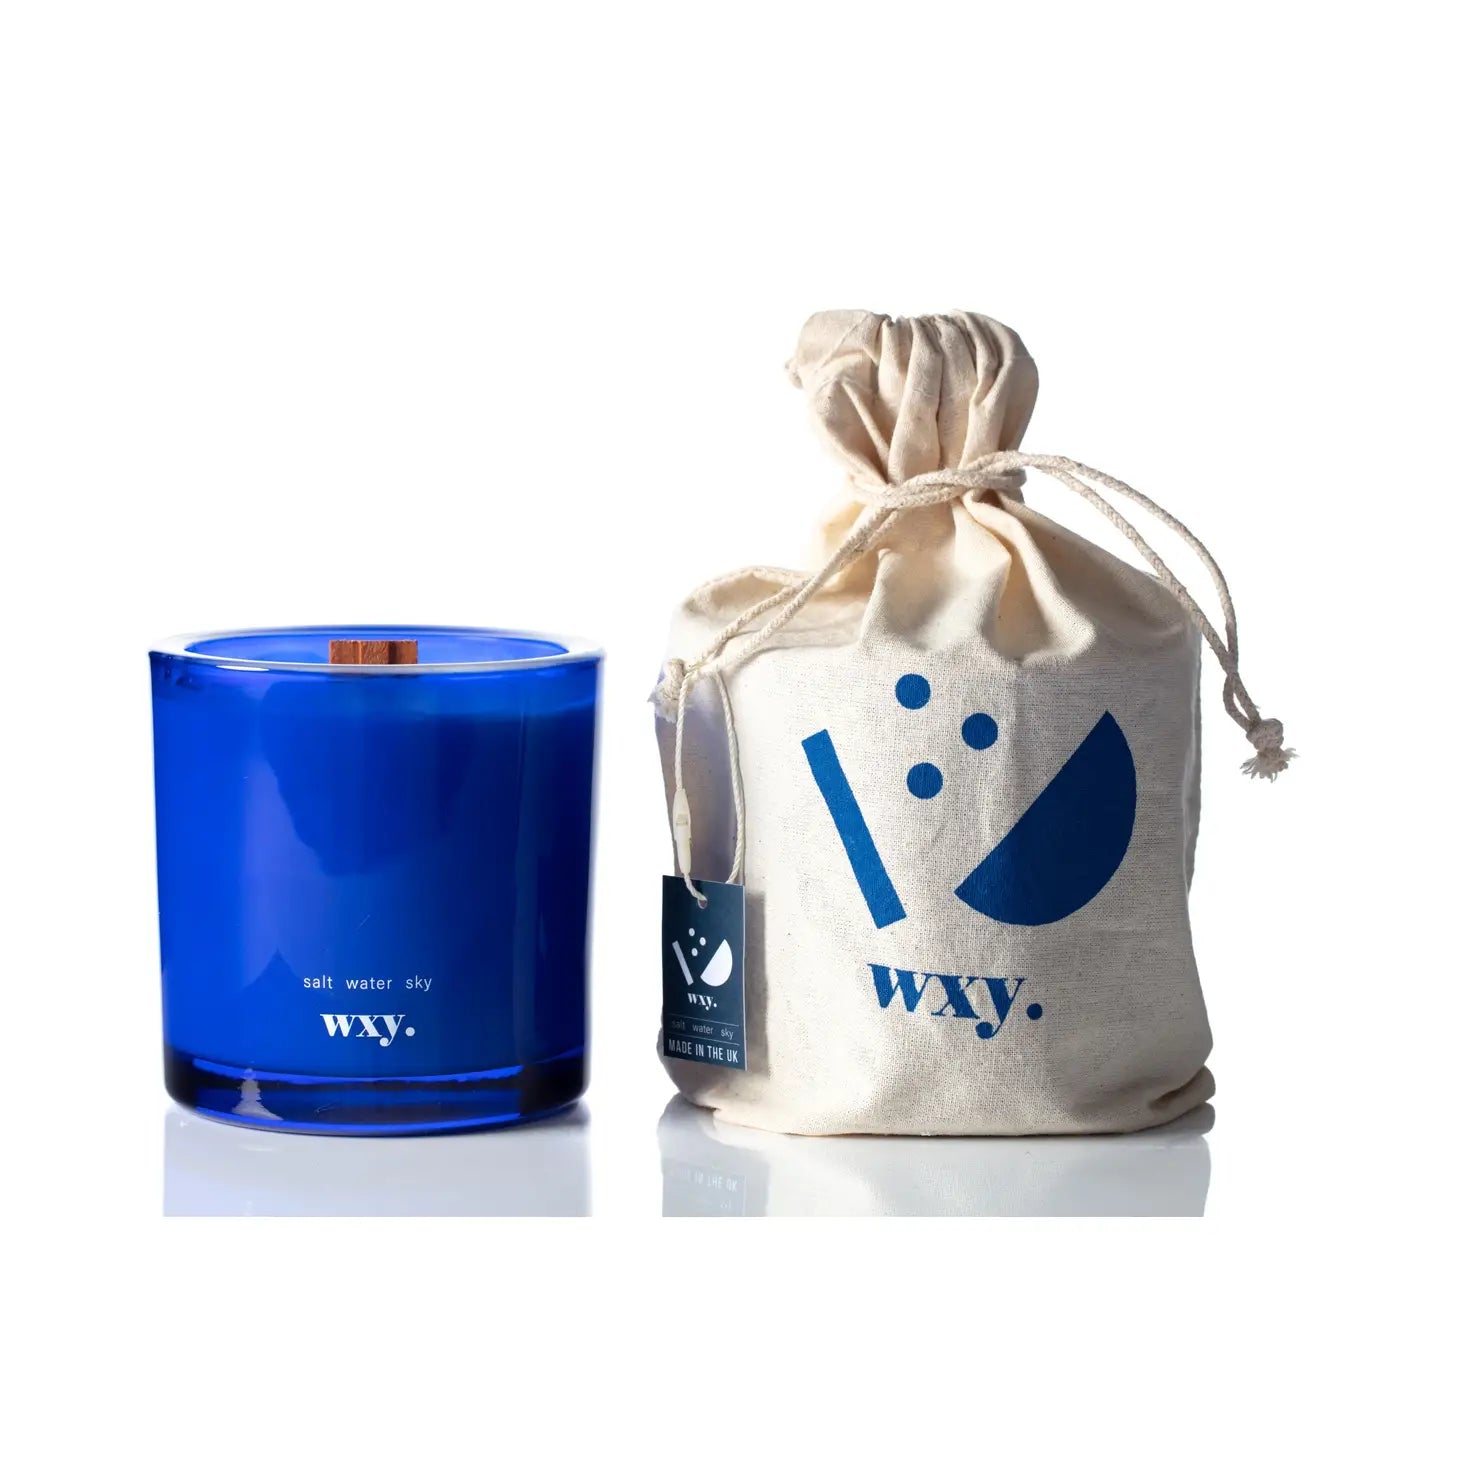 Roam by wxy. - 12.5oz Candle - Salt Water Sky. With Bag